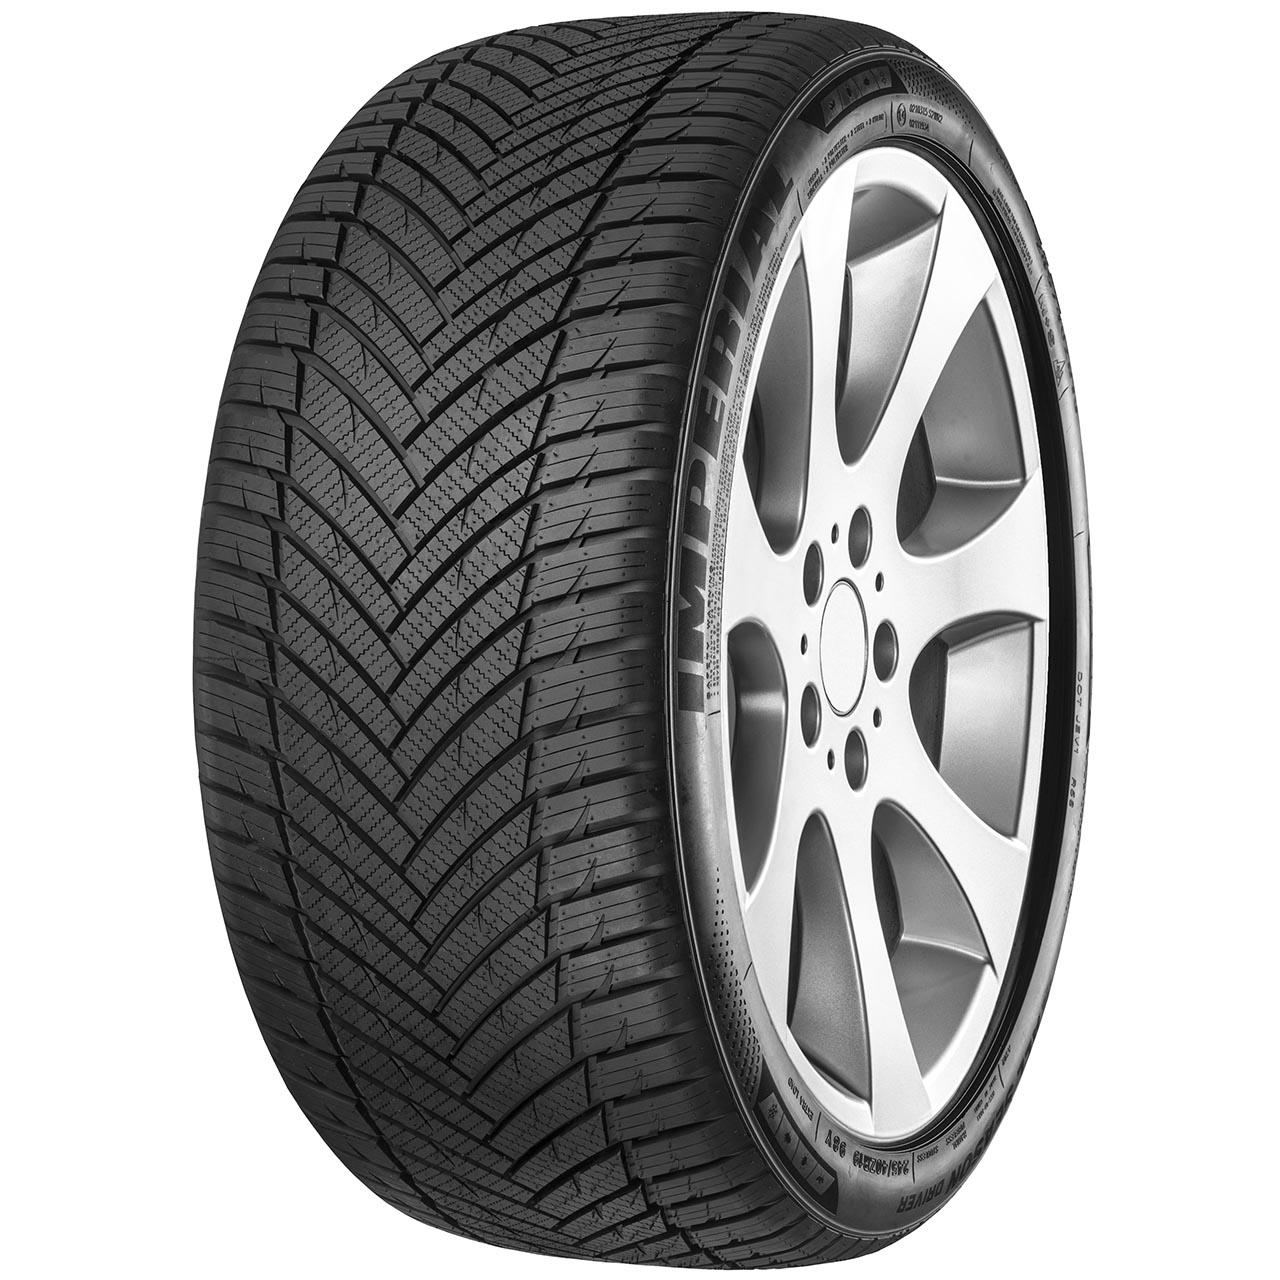 Imperial AS Driver 195/70R14 91T